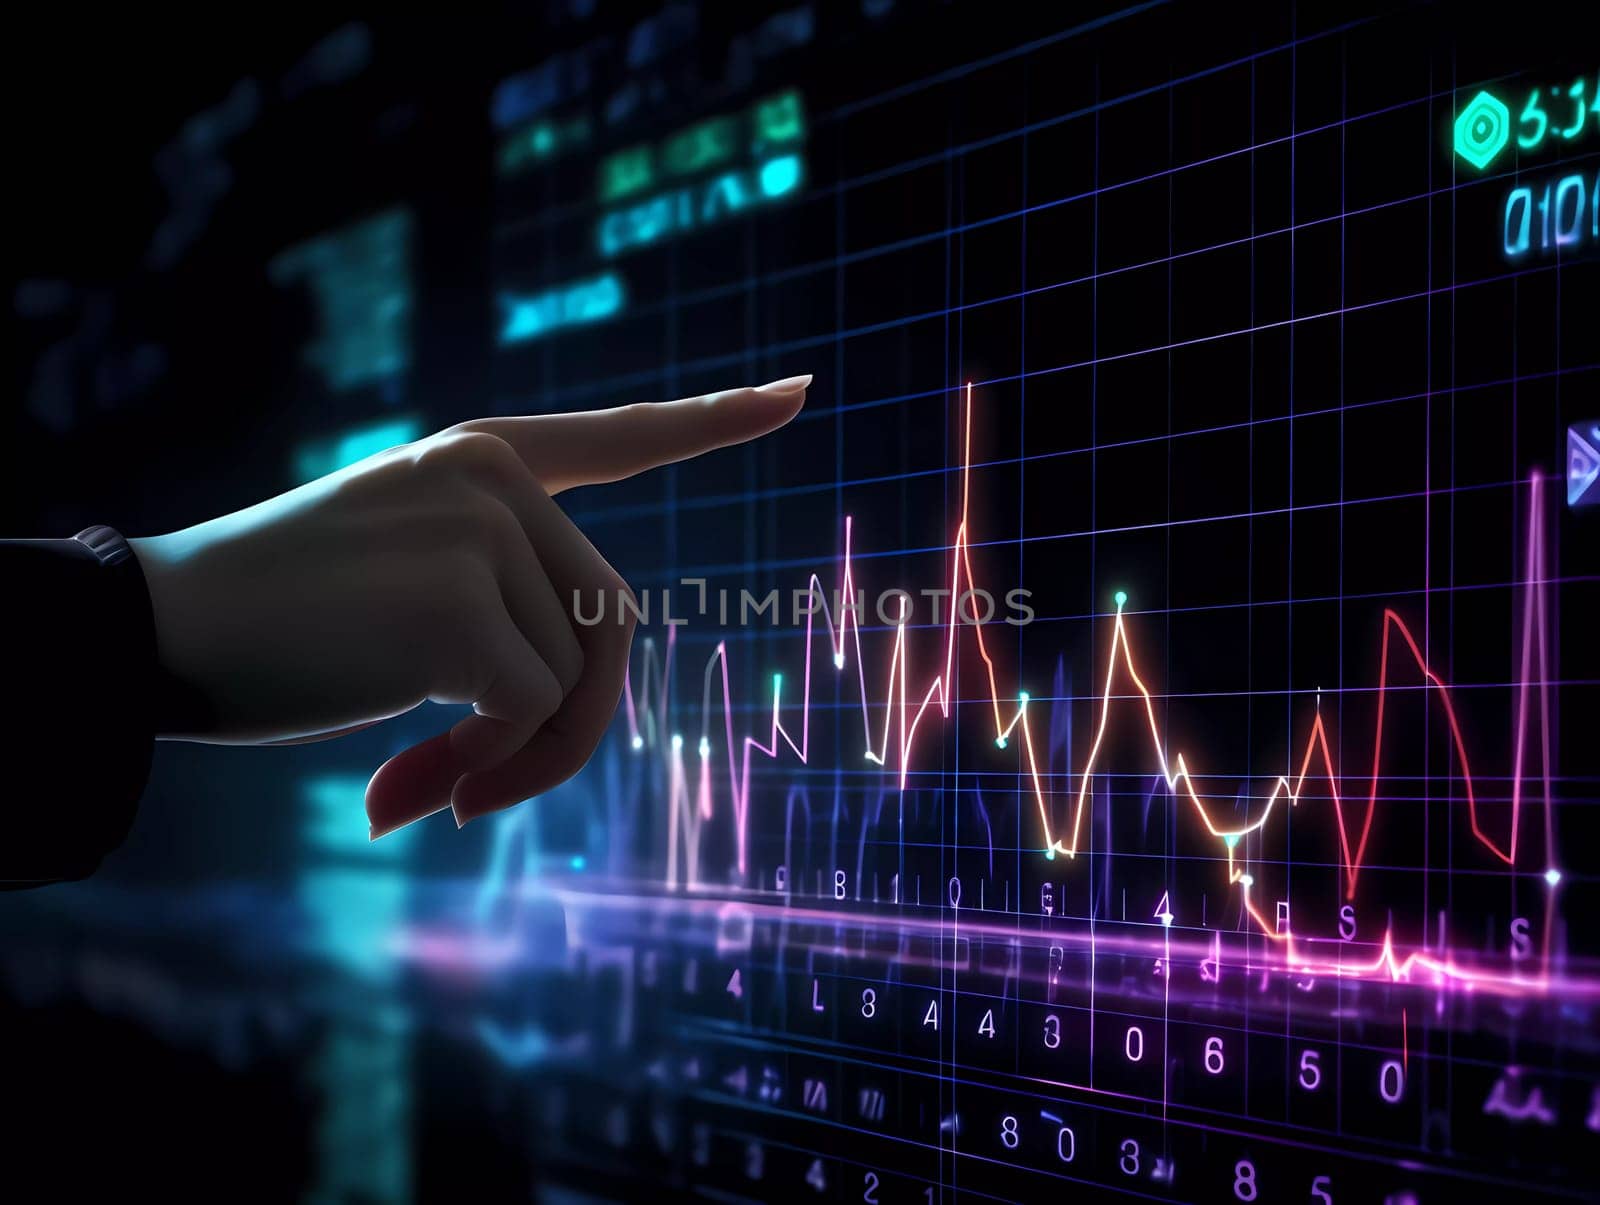 Humans hand shows on hi-tech cyber digital screen with financial graphs. Business analytics concept image